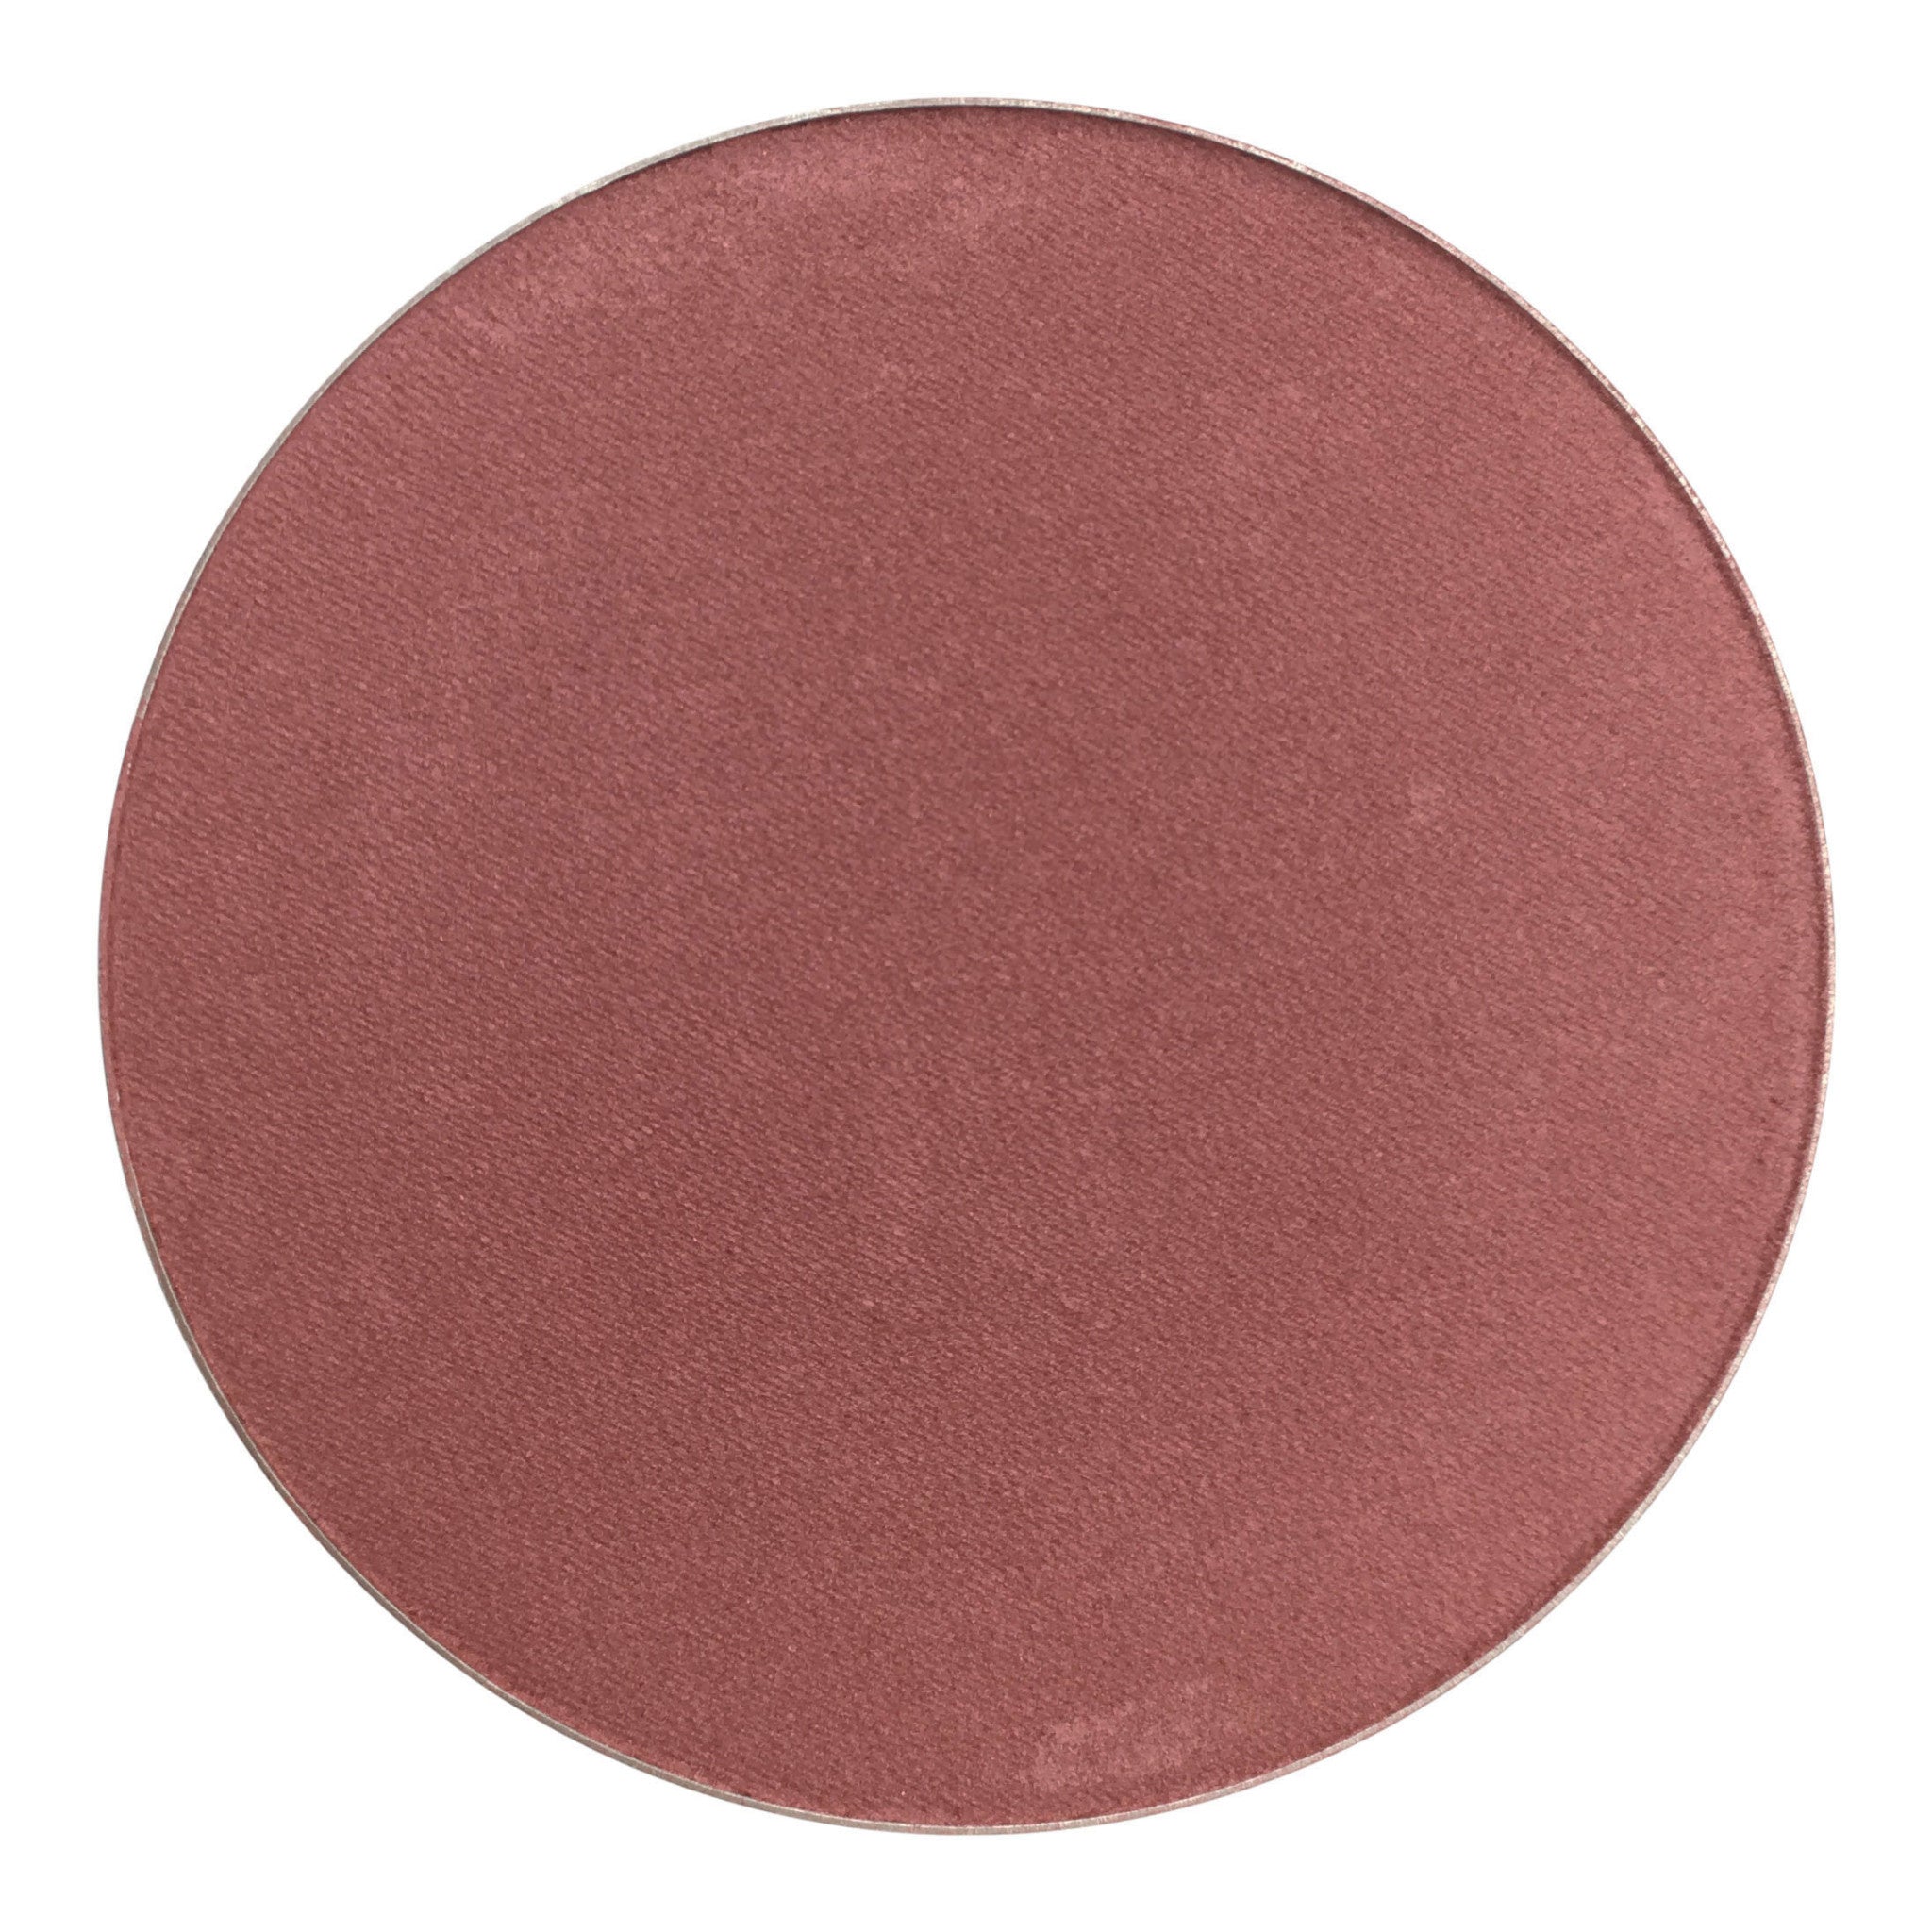 Pure Anada Cheek Colour Compact Day Lily 9g